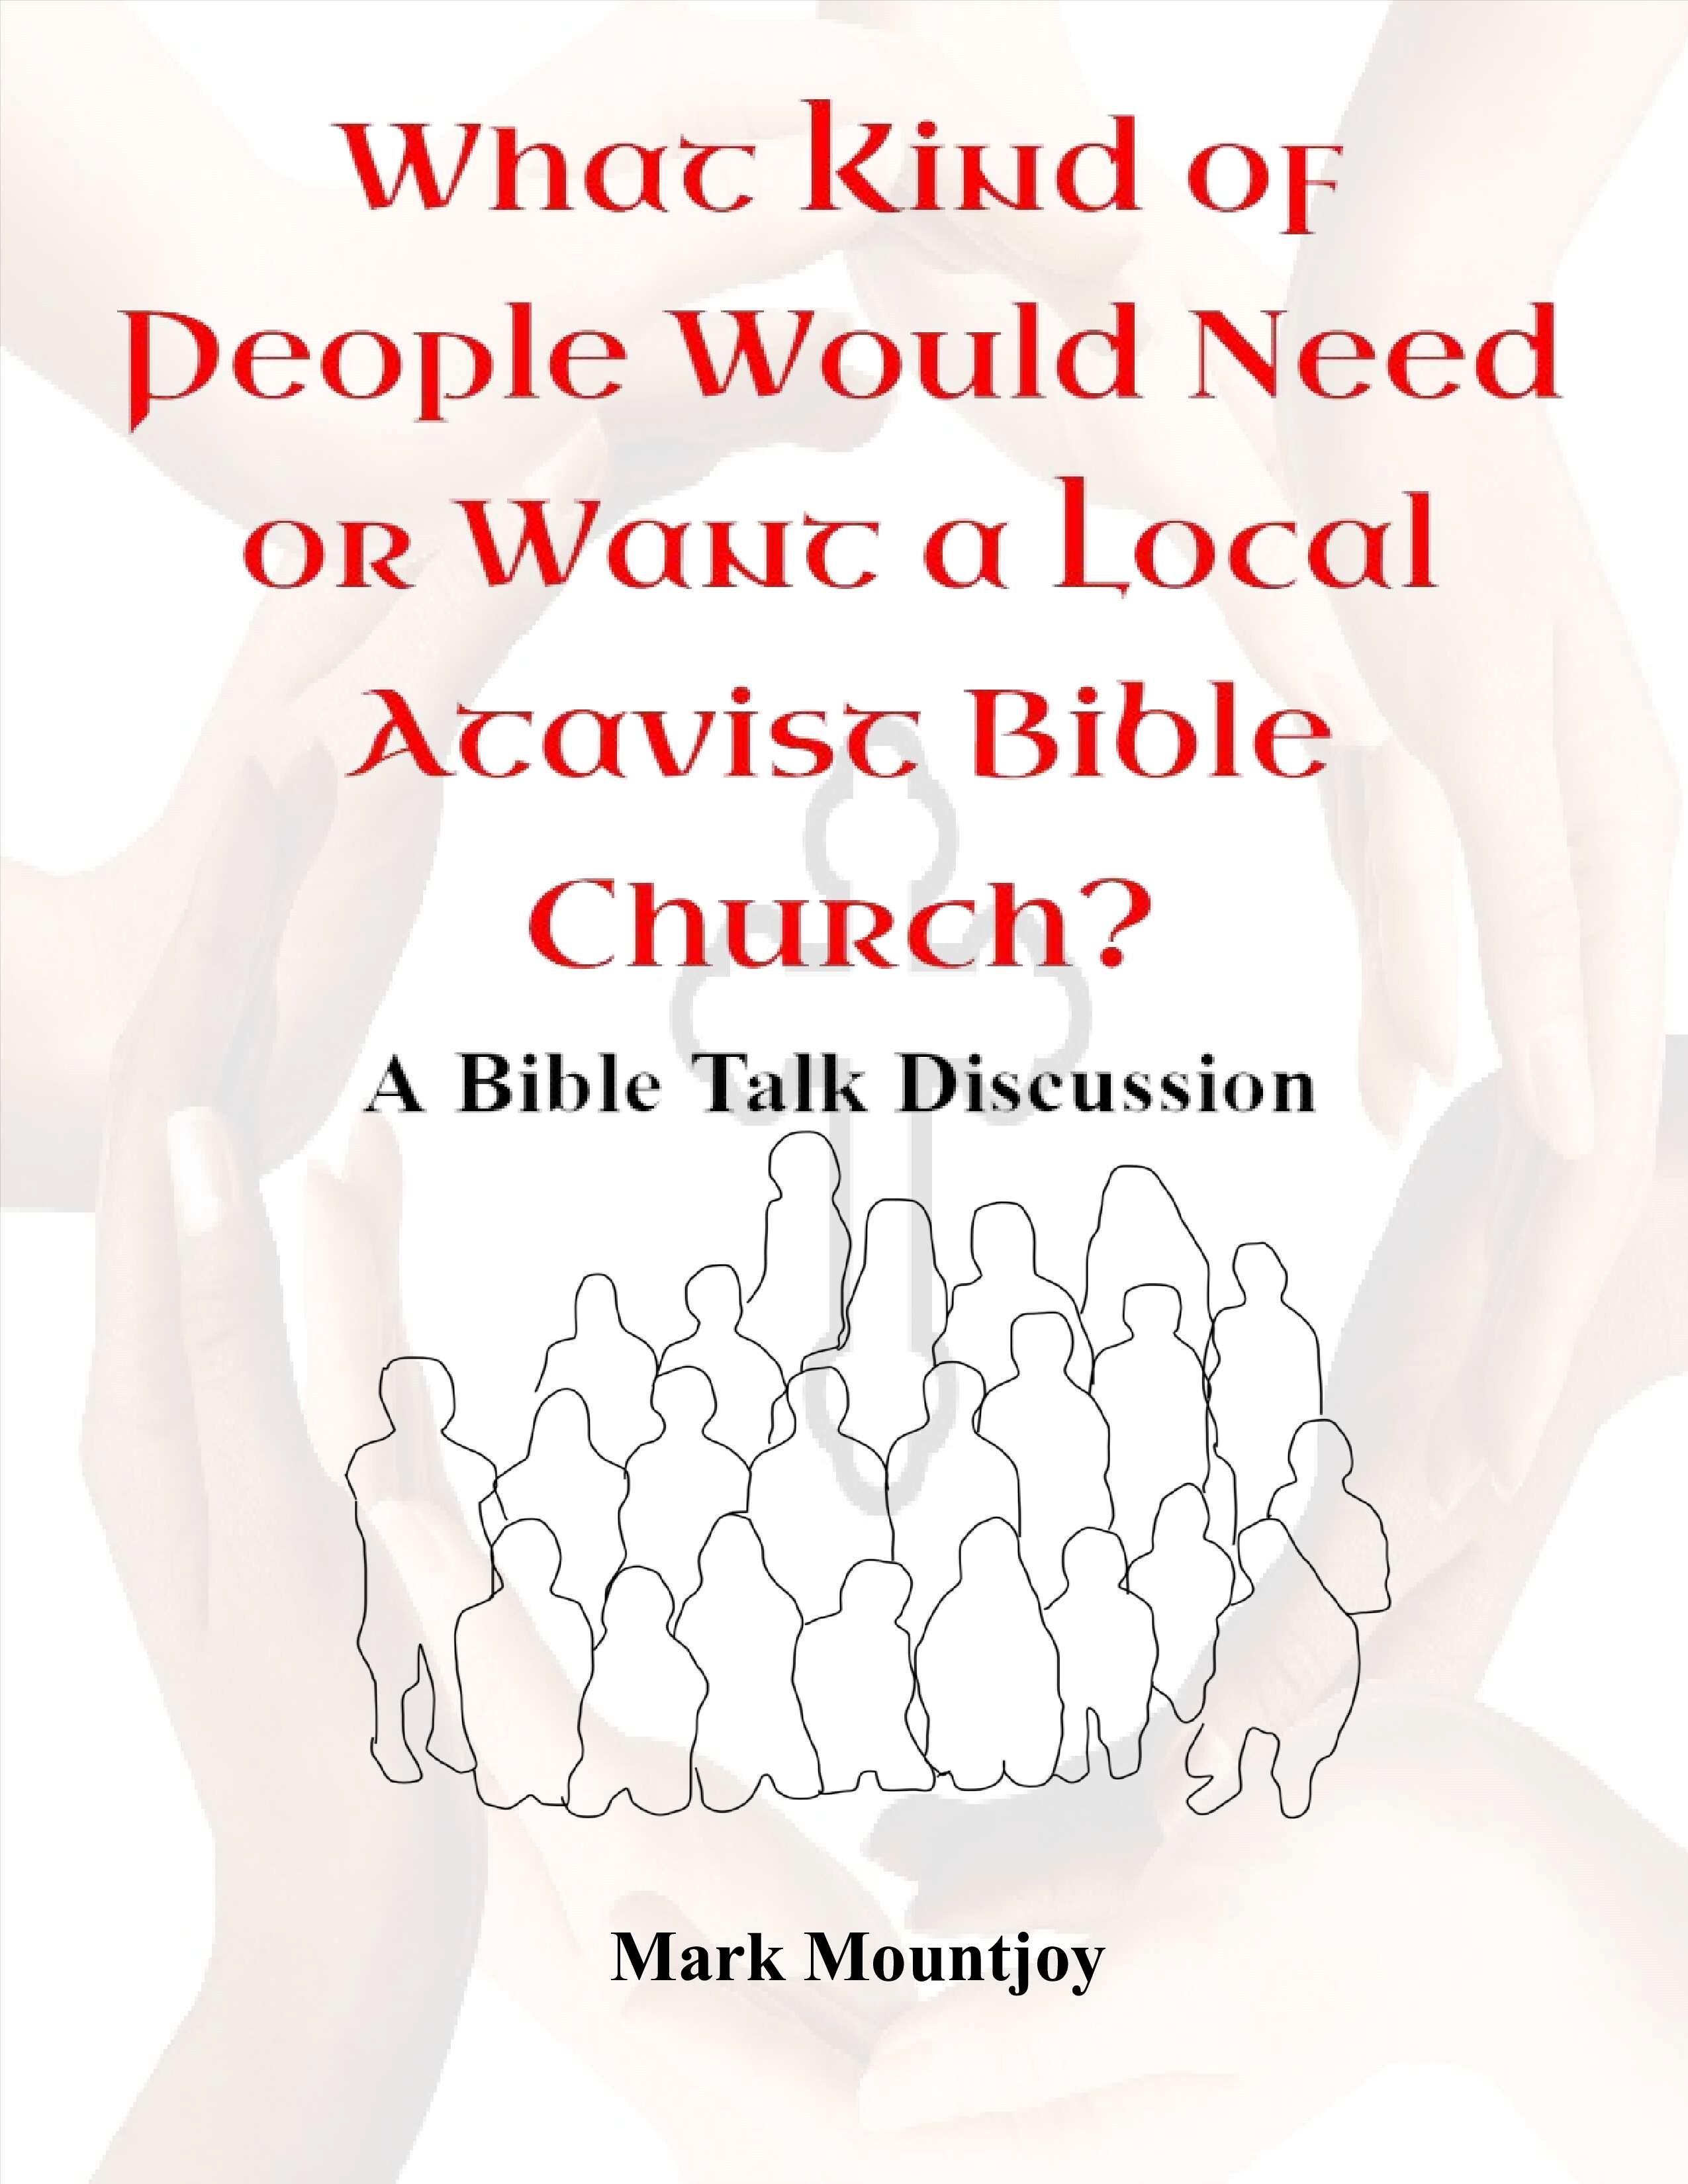 What Kind of Peeople Would Need or Want an Atavist Bible Church BEST